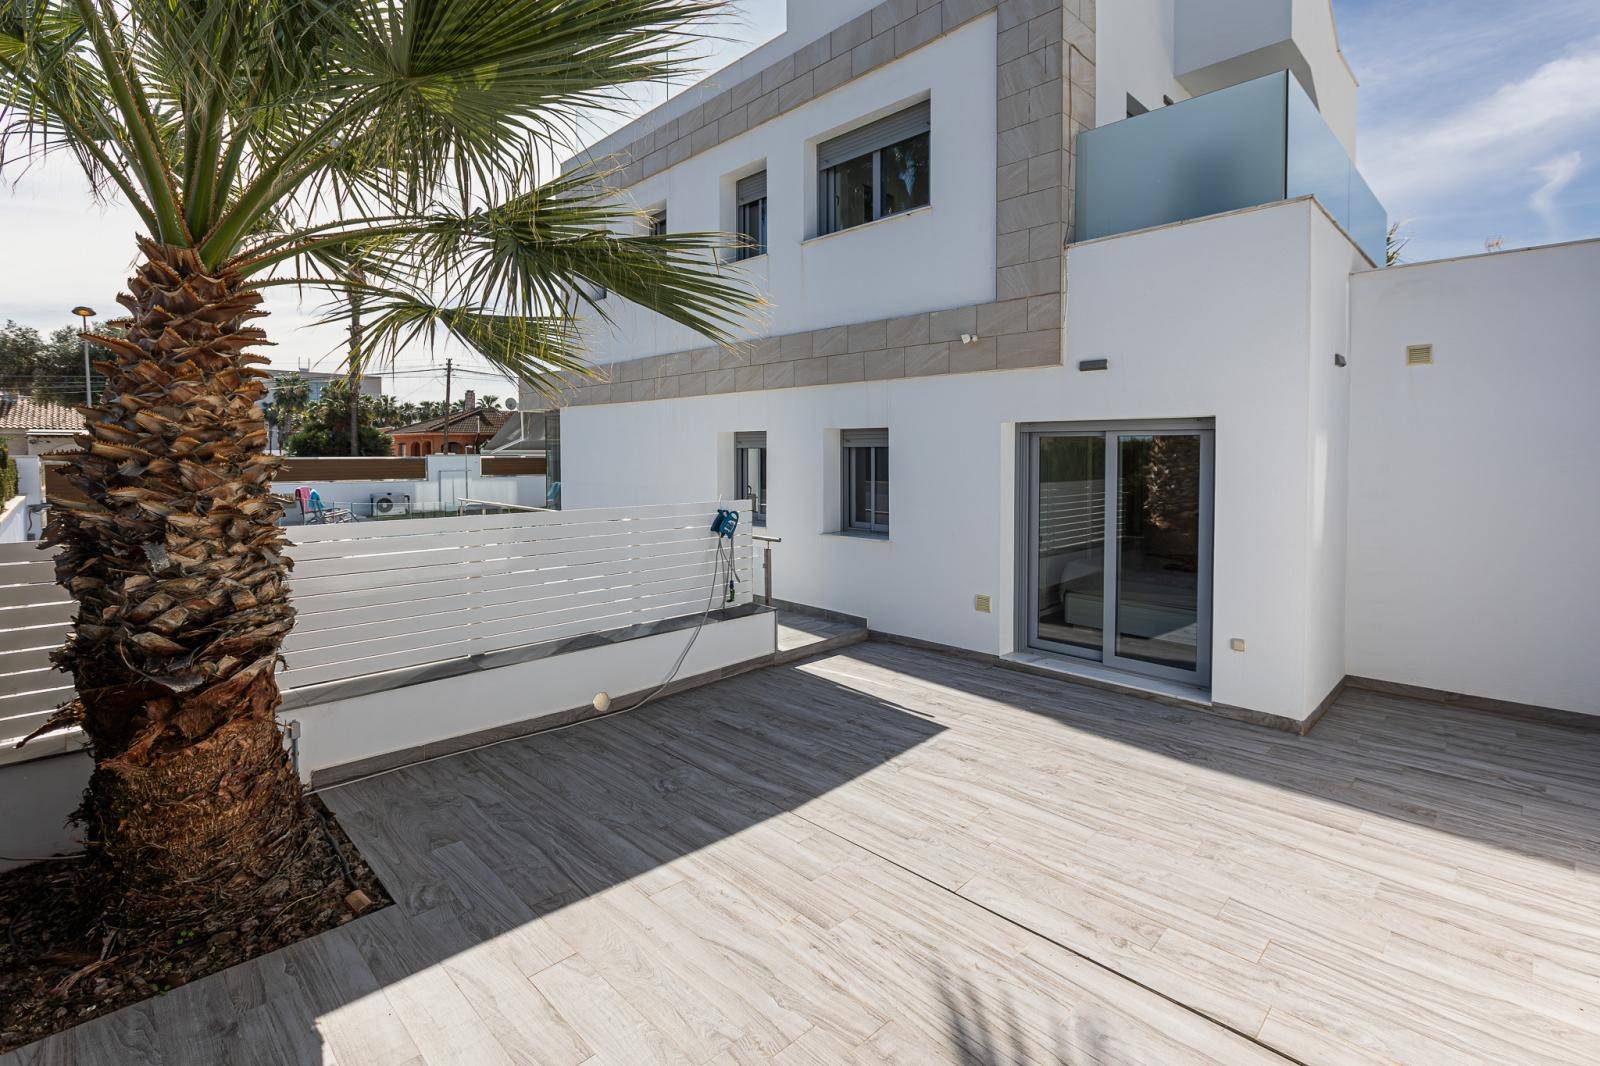 DETACHED VILLA IN URB. BALCONIES WITH HEATED POOL